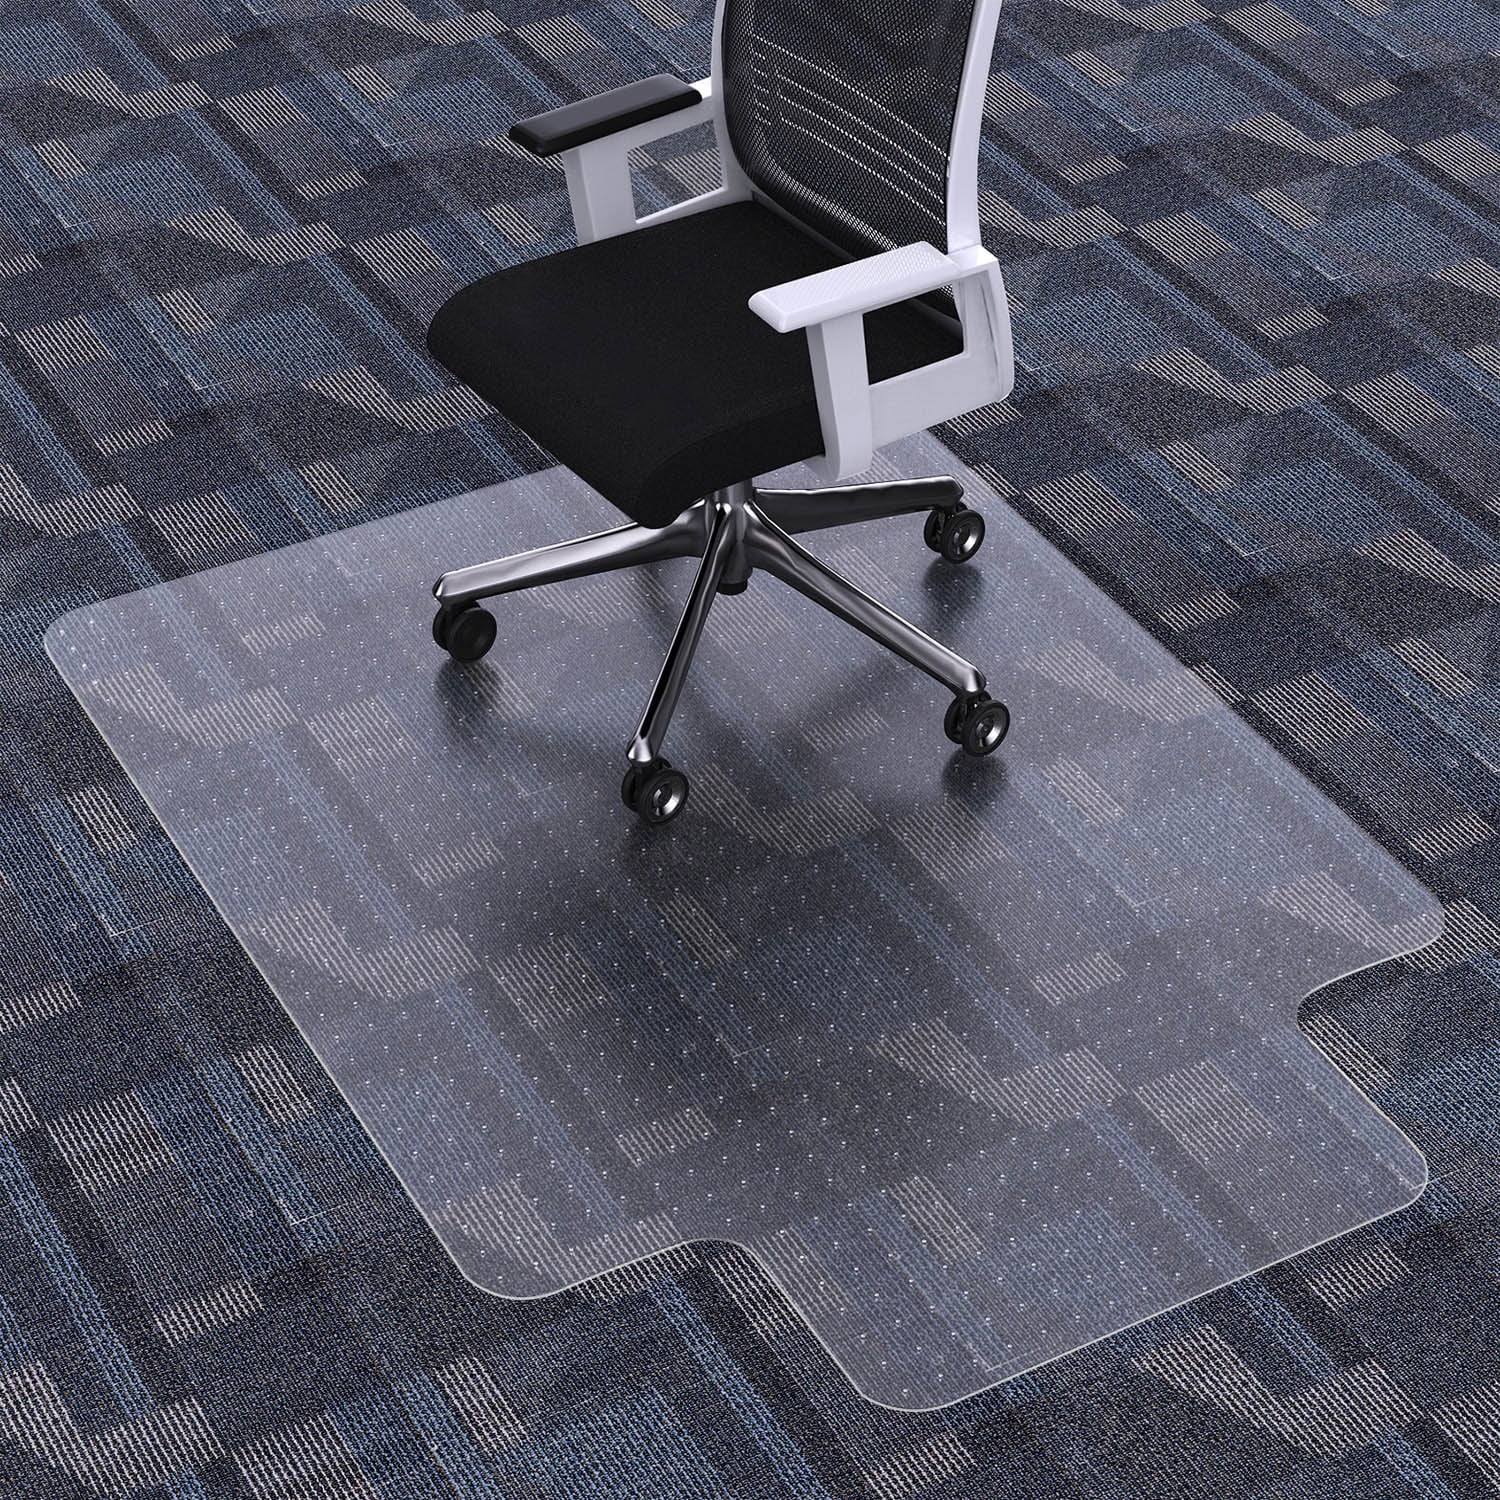 Office Chair Mat for Carpeted Floors, Desk Mats 48X30 for Rolling Desk on  Low Pile Carpets, Small Computer Gaming Plastic Floor Mats for Office